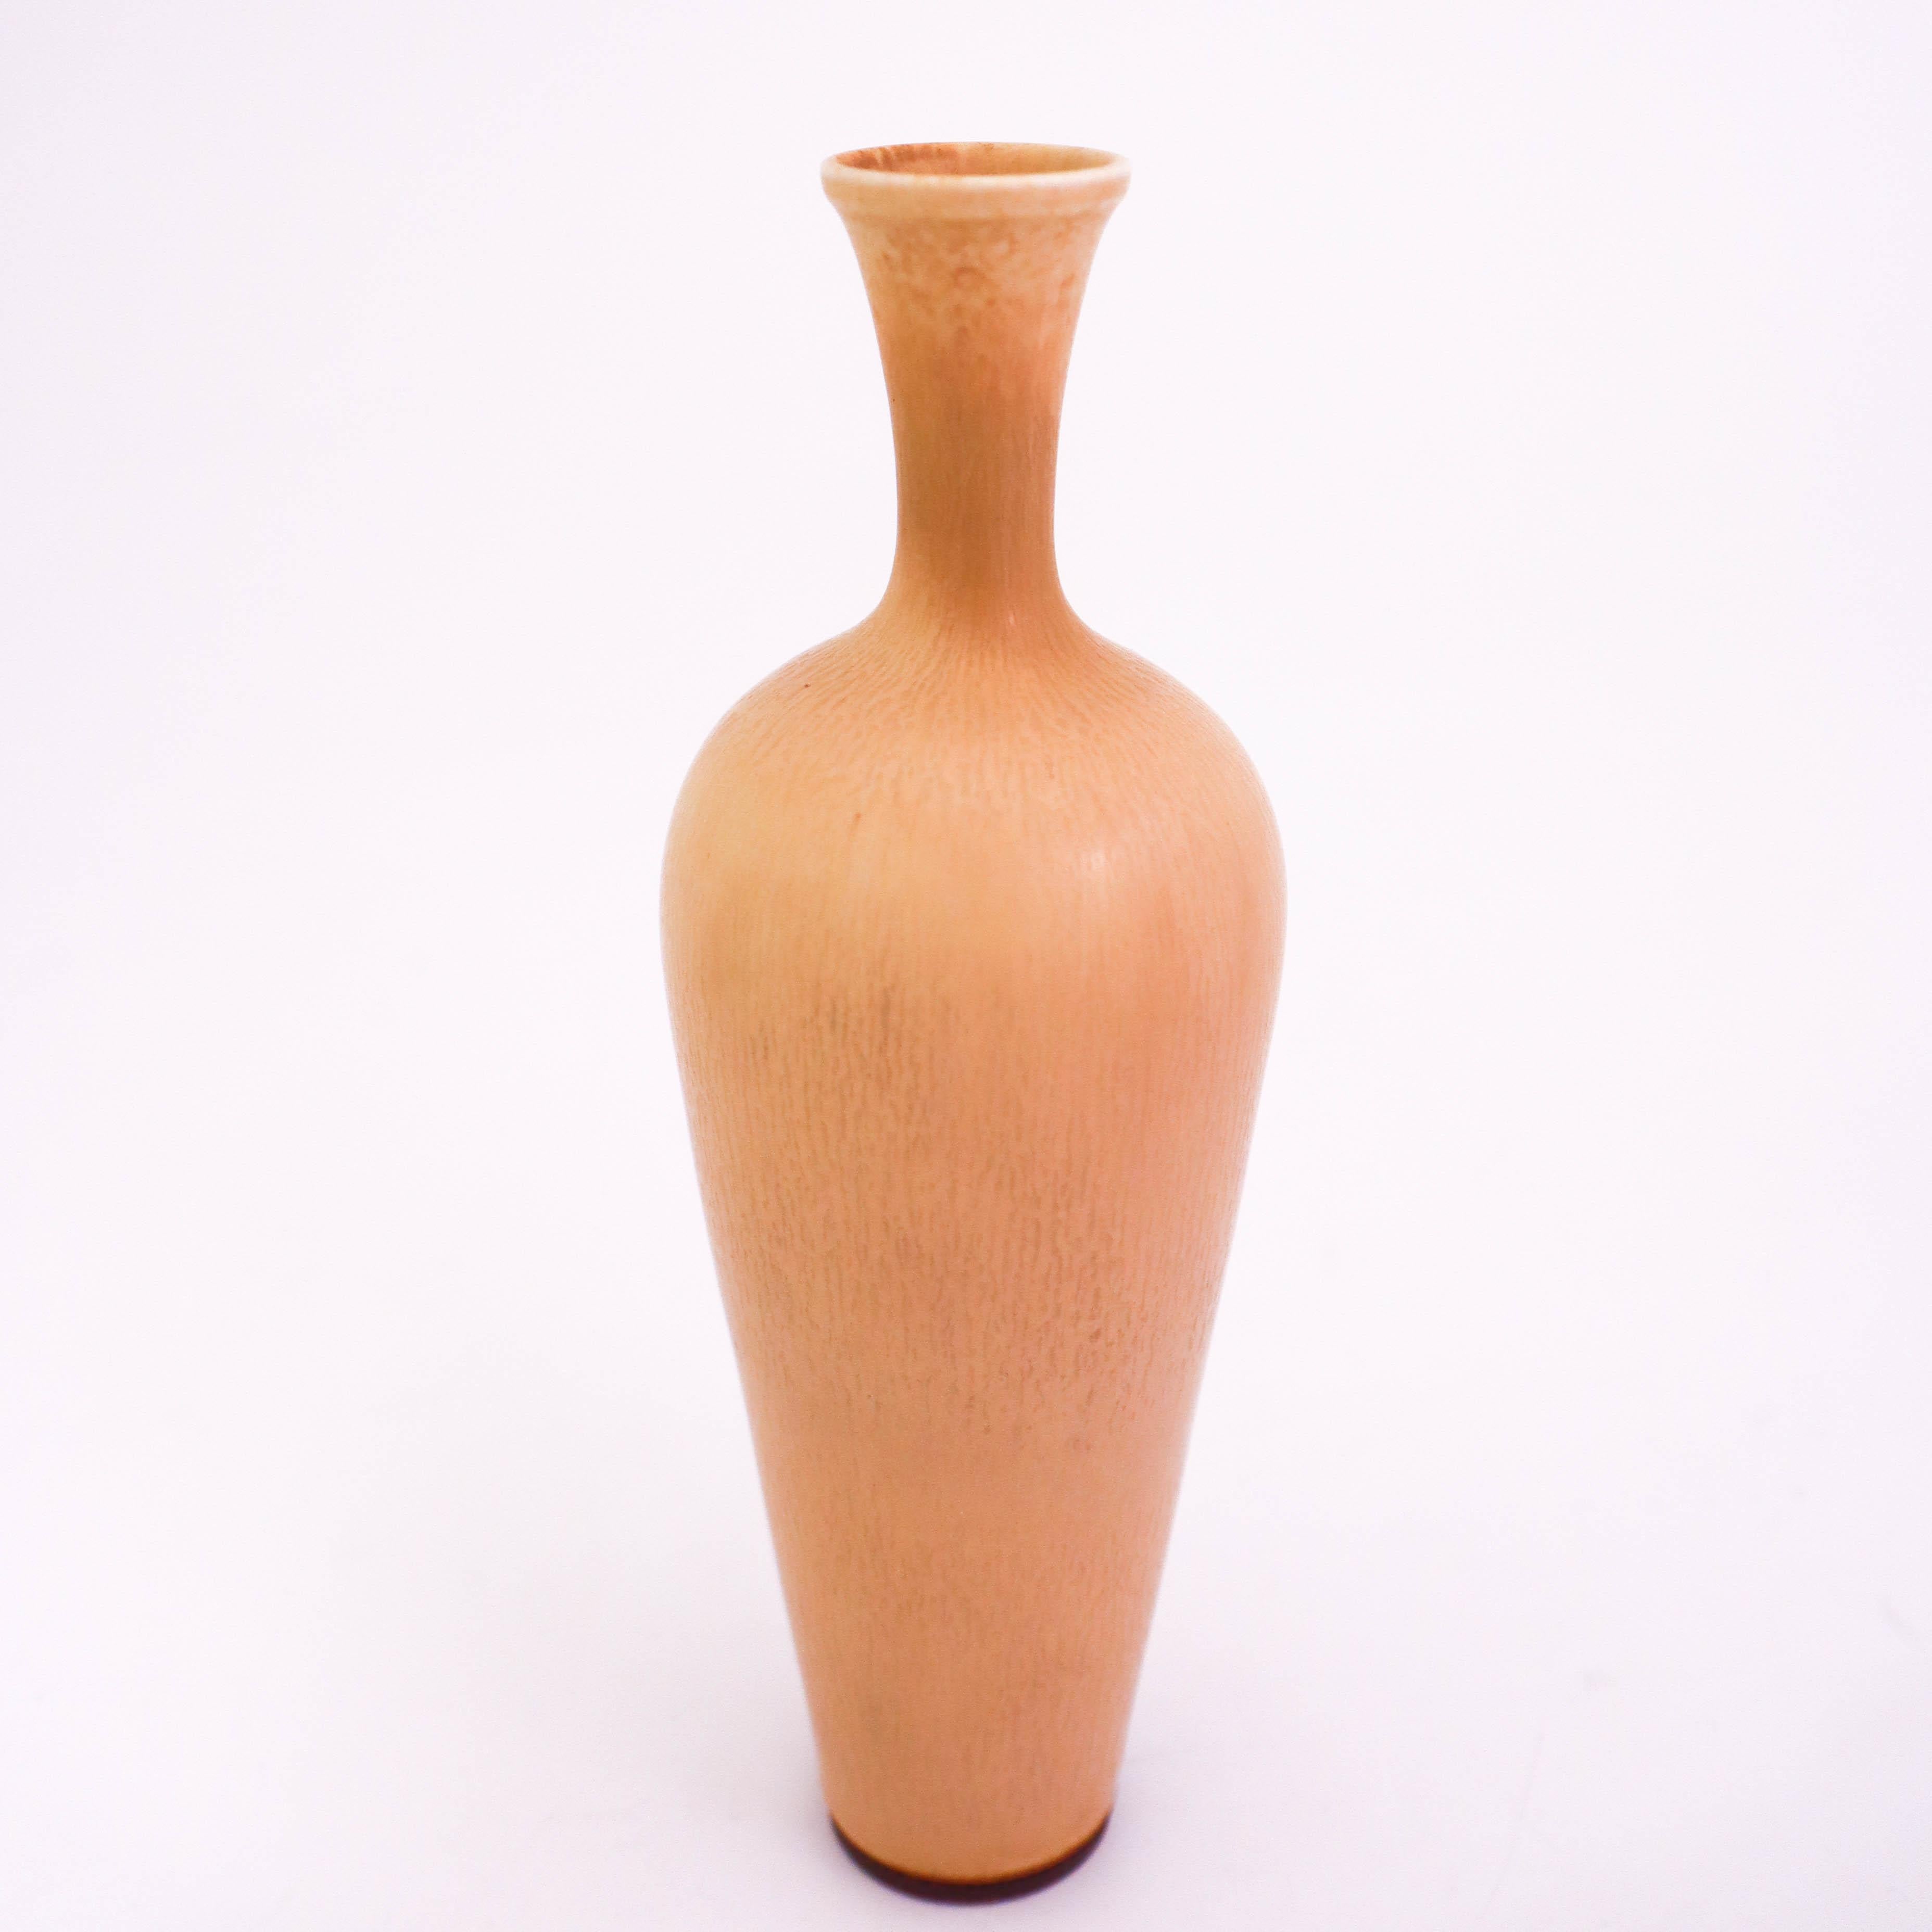 A beige stoneware vase designed by Berndt Friberg from Gustavsberg. The vase is 17.5 cm. It's in very good condition.